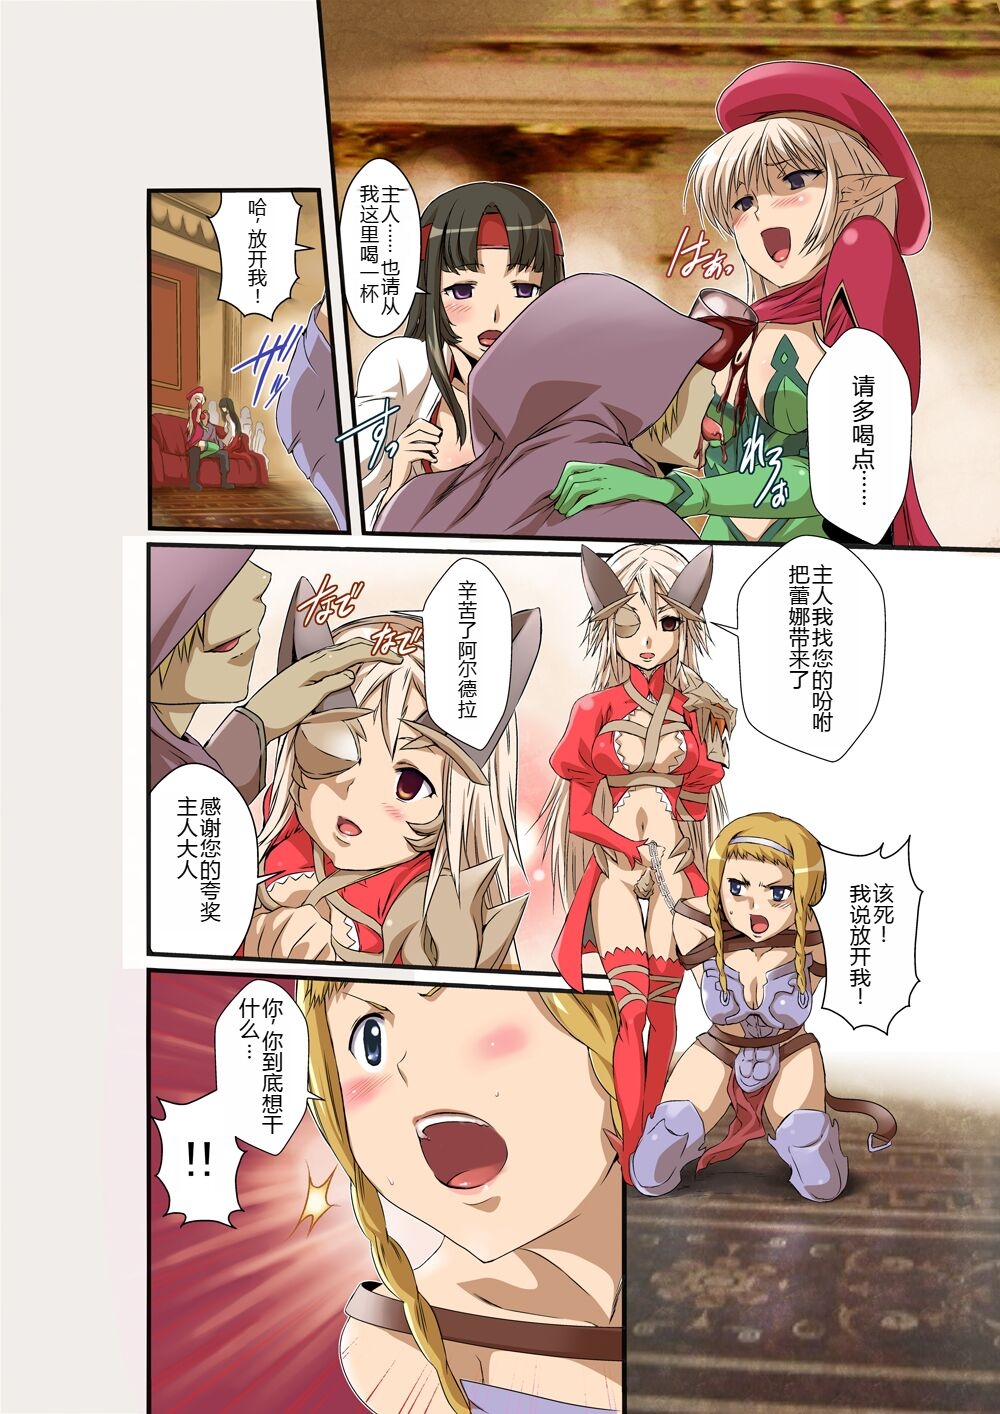 [Utsuro na Hitomi] Queen's *lade Mind-control Manga (Queen's Blade) [chinese] [lalala1234个人机翻汉化] 19